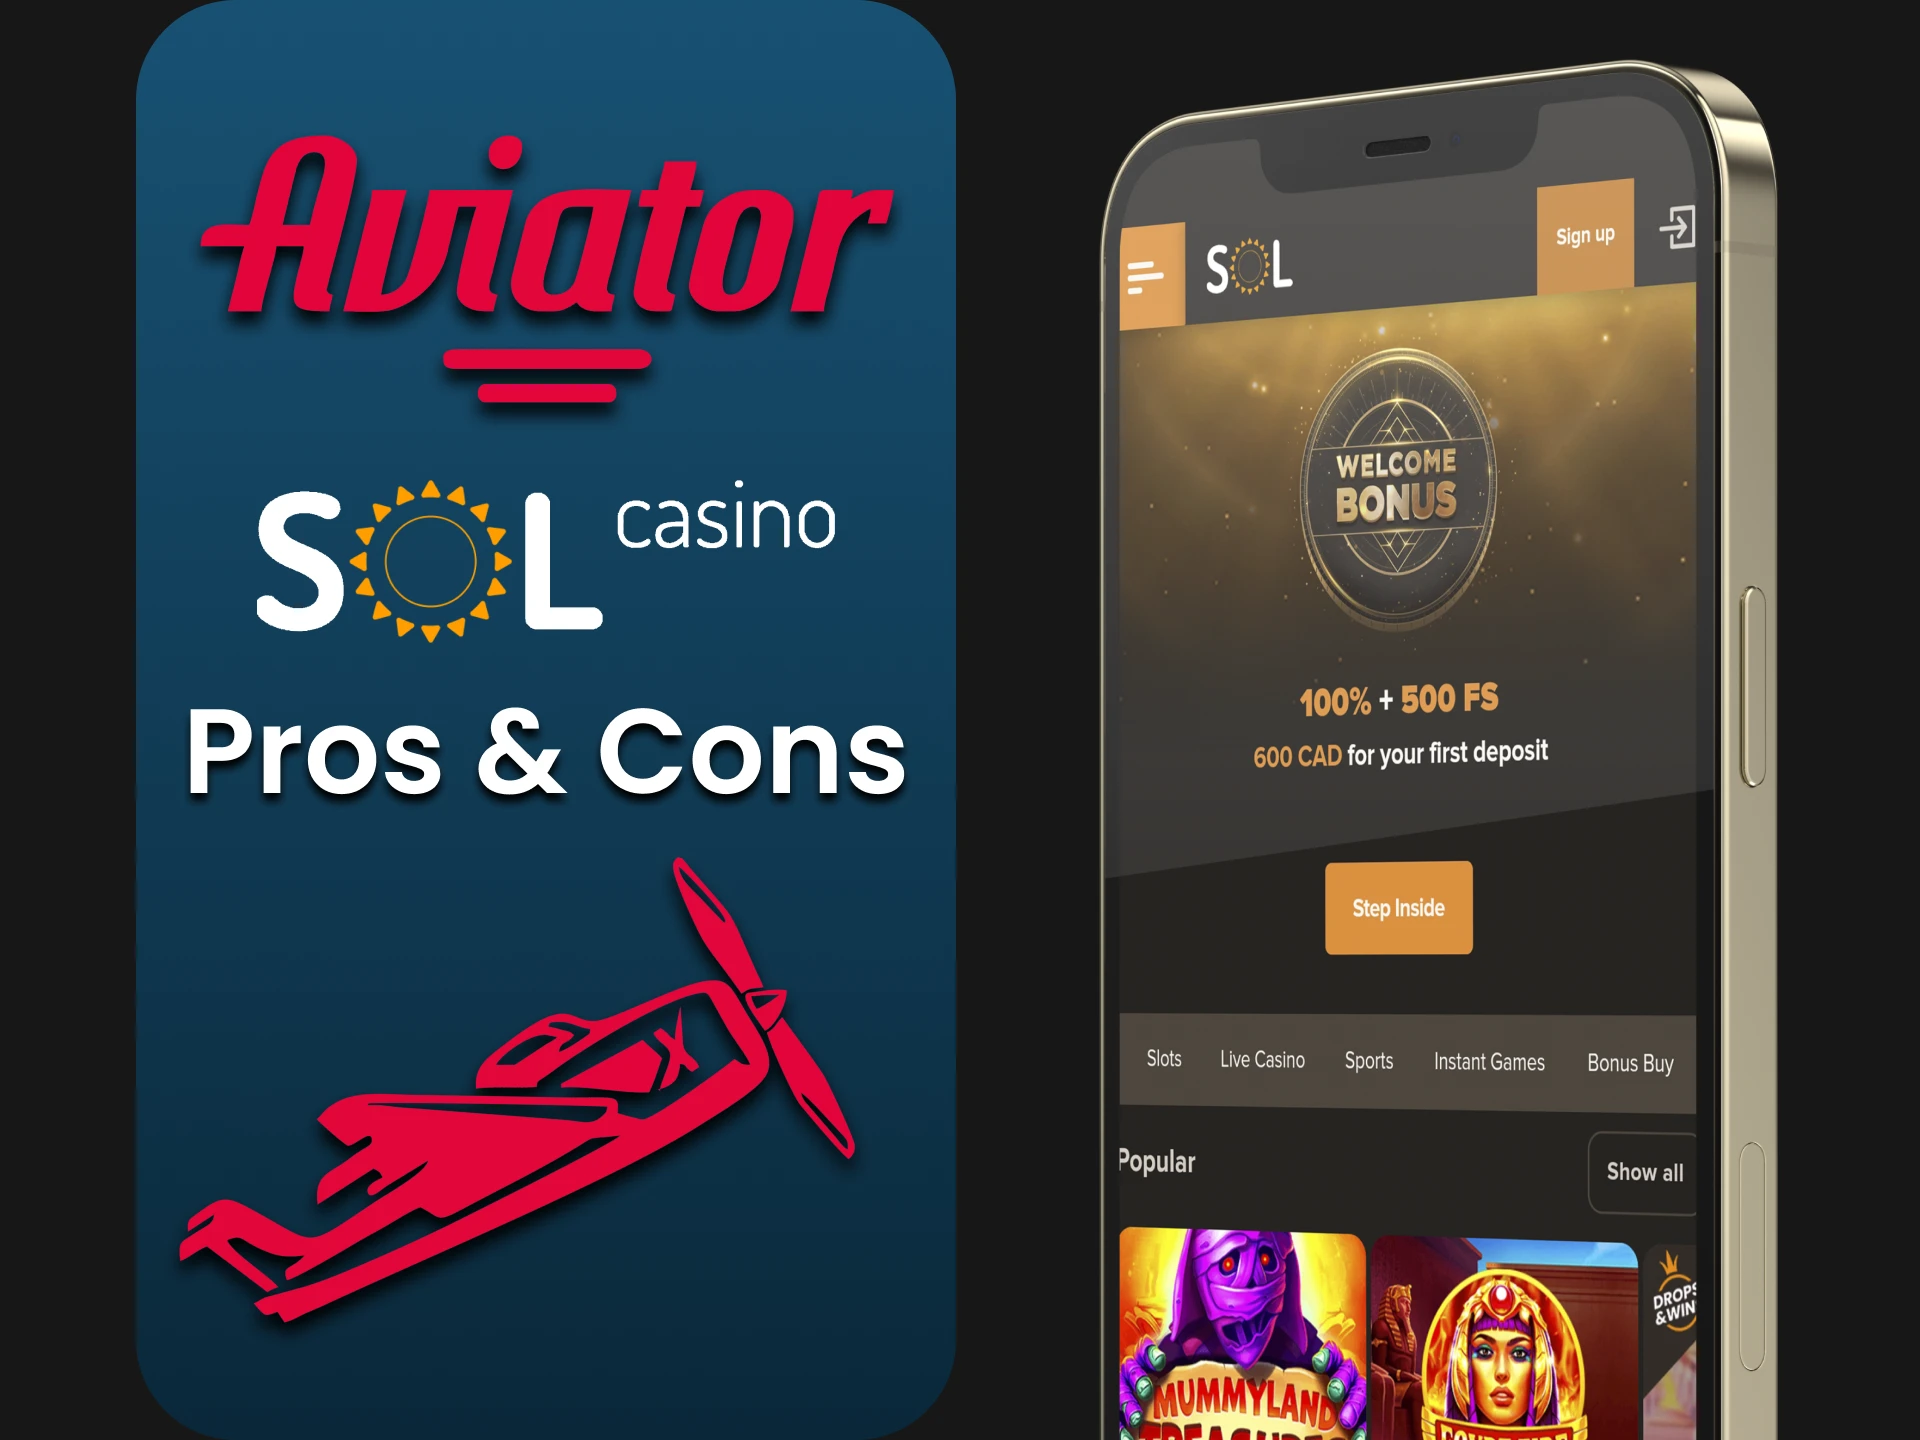 We will tell you about the pros and cons of Sol Casino for the Aviator game.